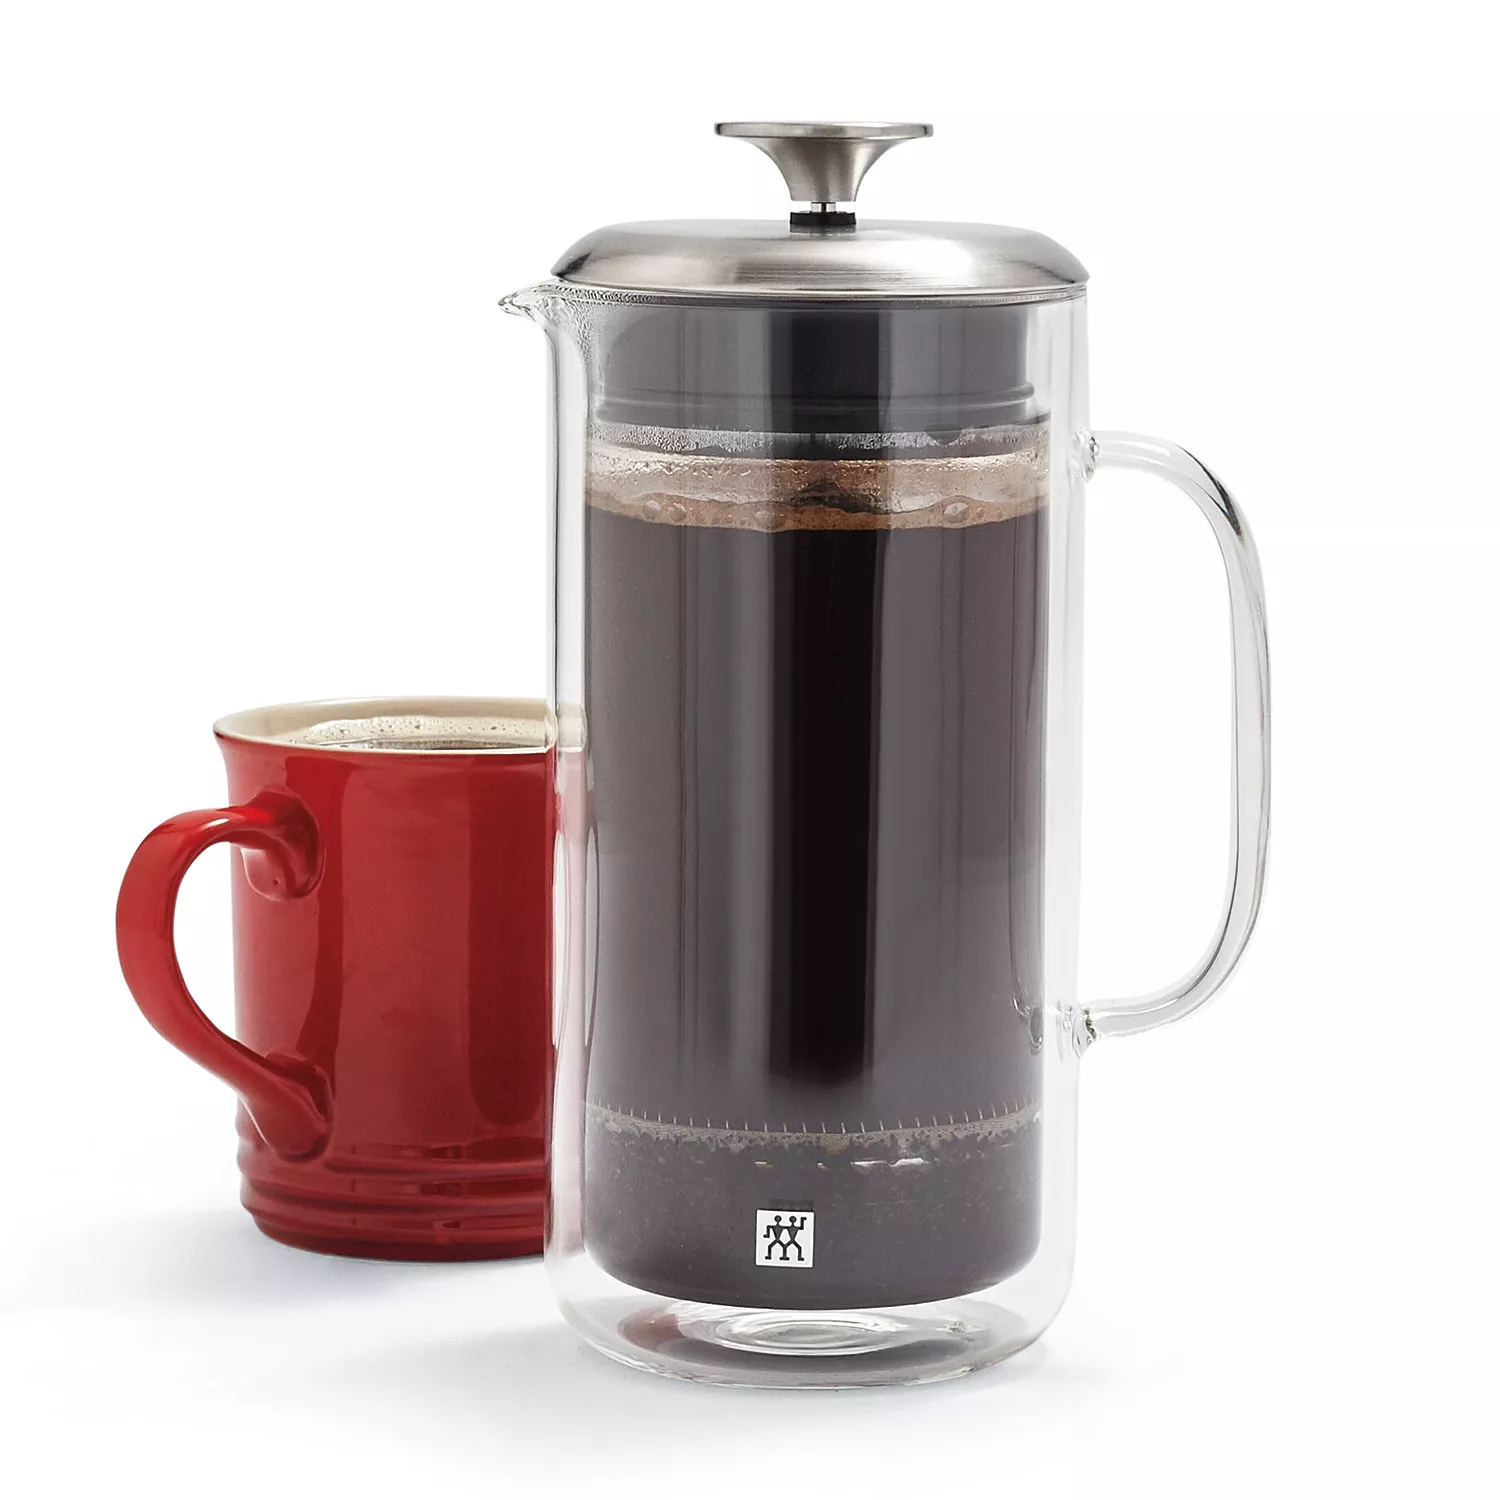 ZWILLING Sorrento Plus Double Wall Glassware Double wall, French press